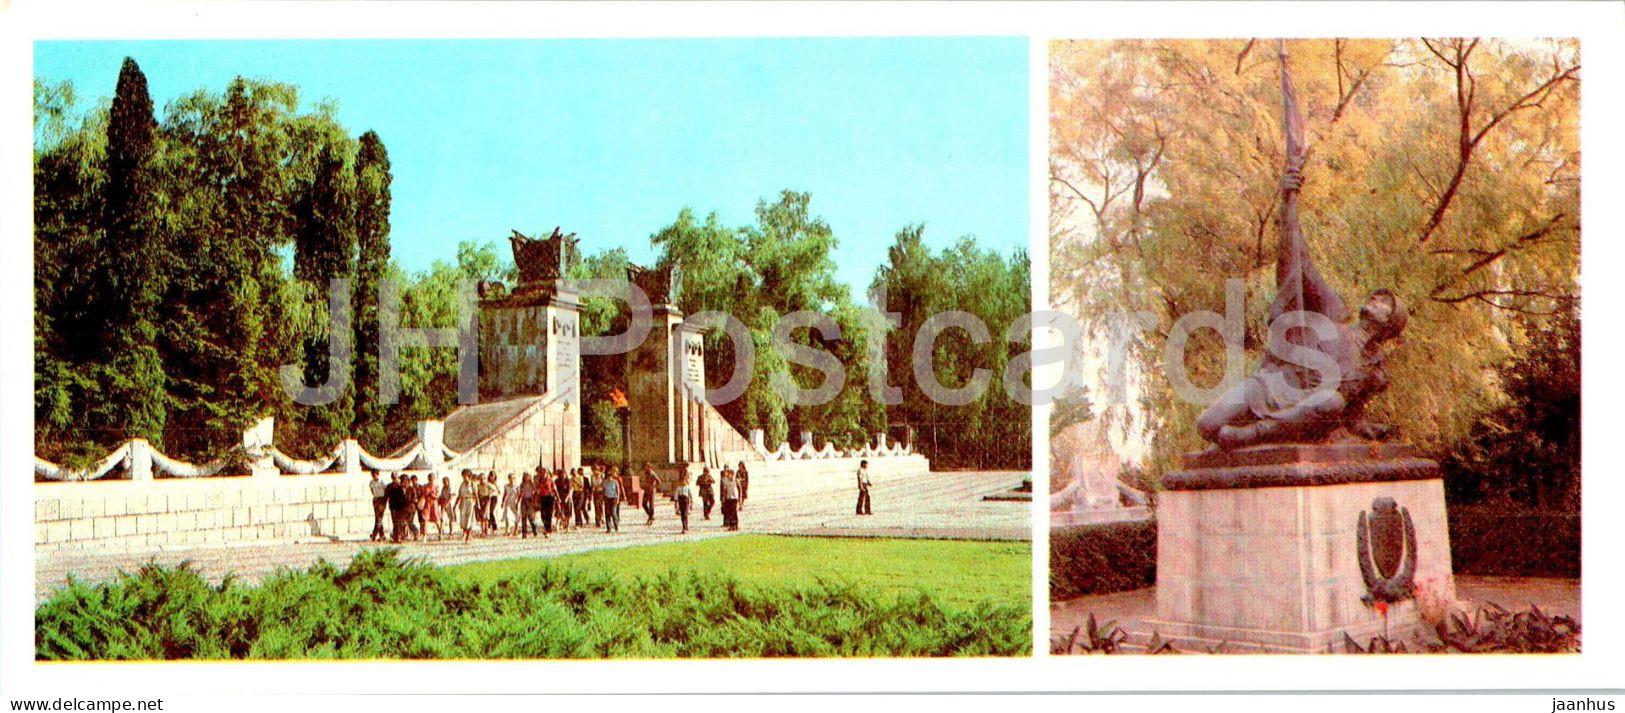 Lviv - Central Entrance To The Hill Of Glory - Mass Grave Of Tank Soldiers Died In WWII - 1984 - Ukraine USSR - Unused - Ukraine